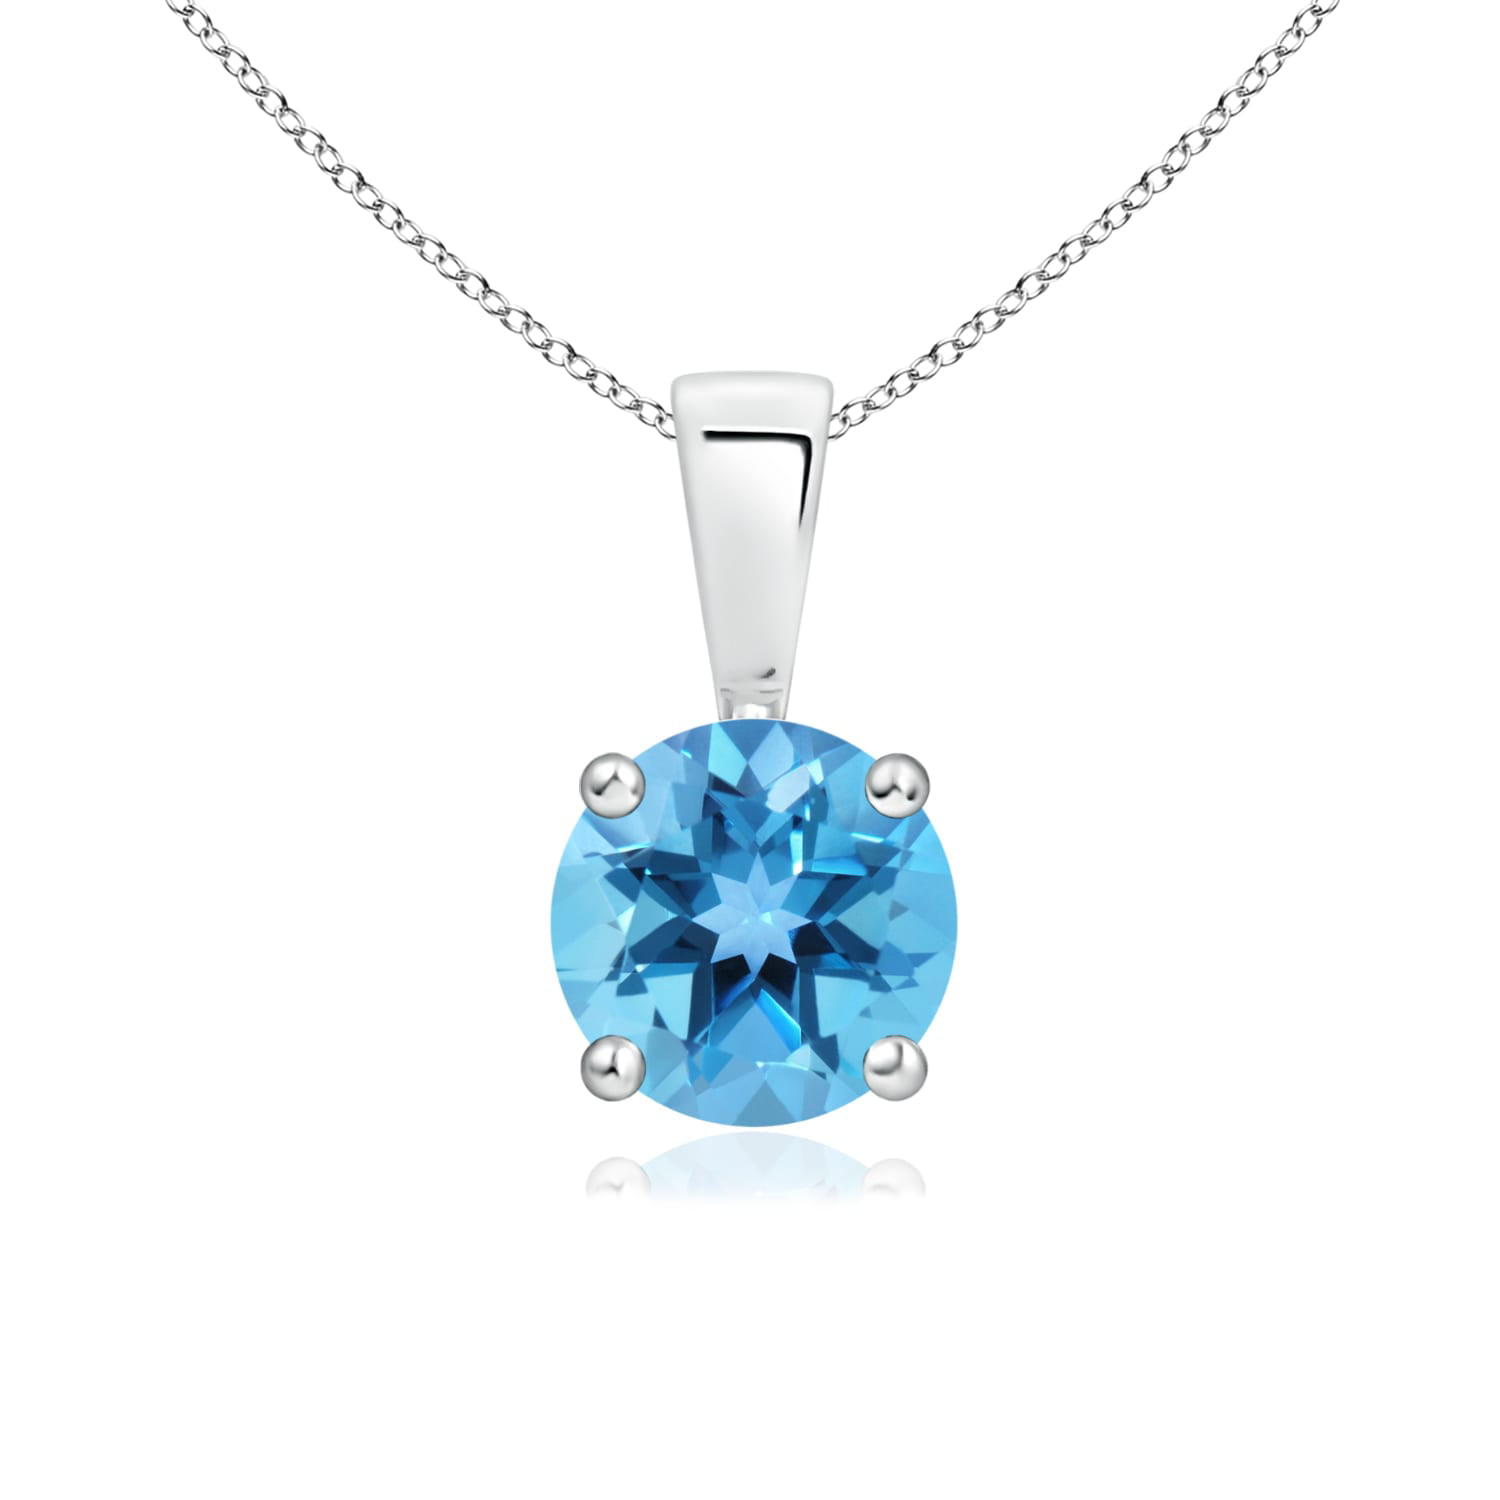 13mm x 6mm Rhodium Plated Diamond and Sky Blue Topaz Heart Love Pendant 0.01cttw 925 Sterling Silver